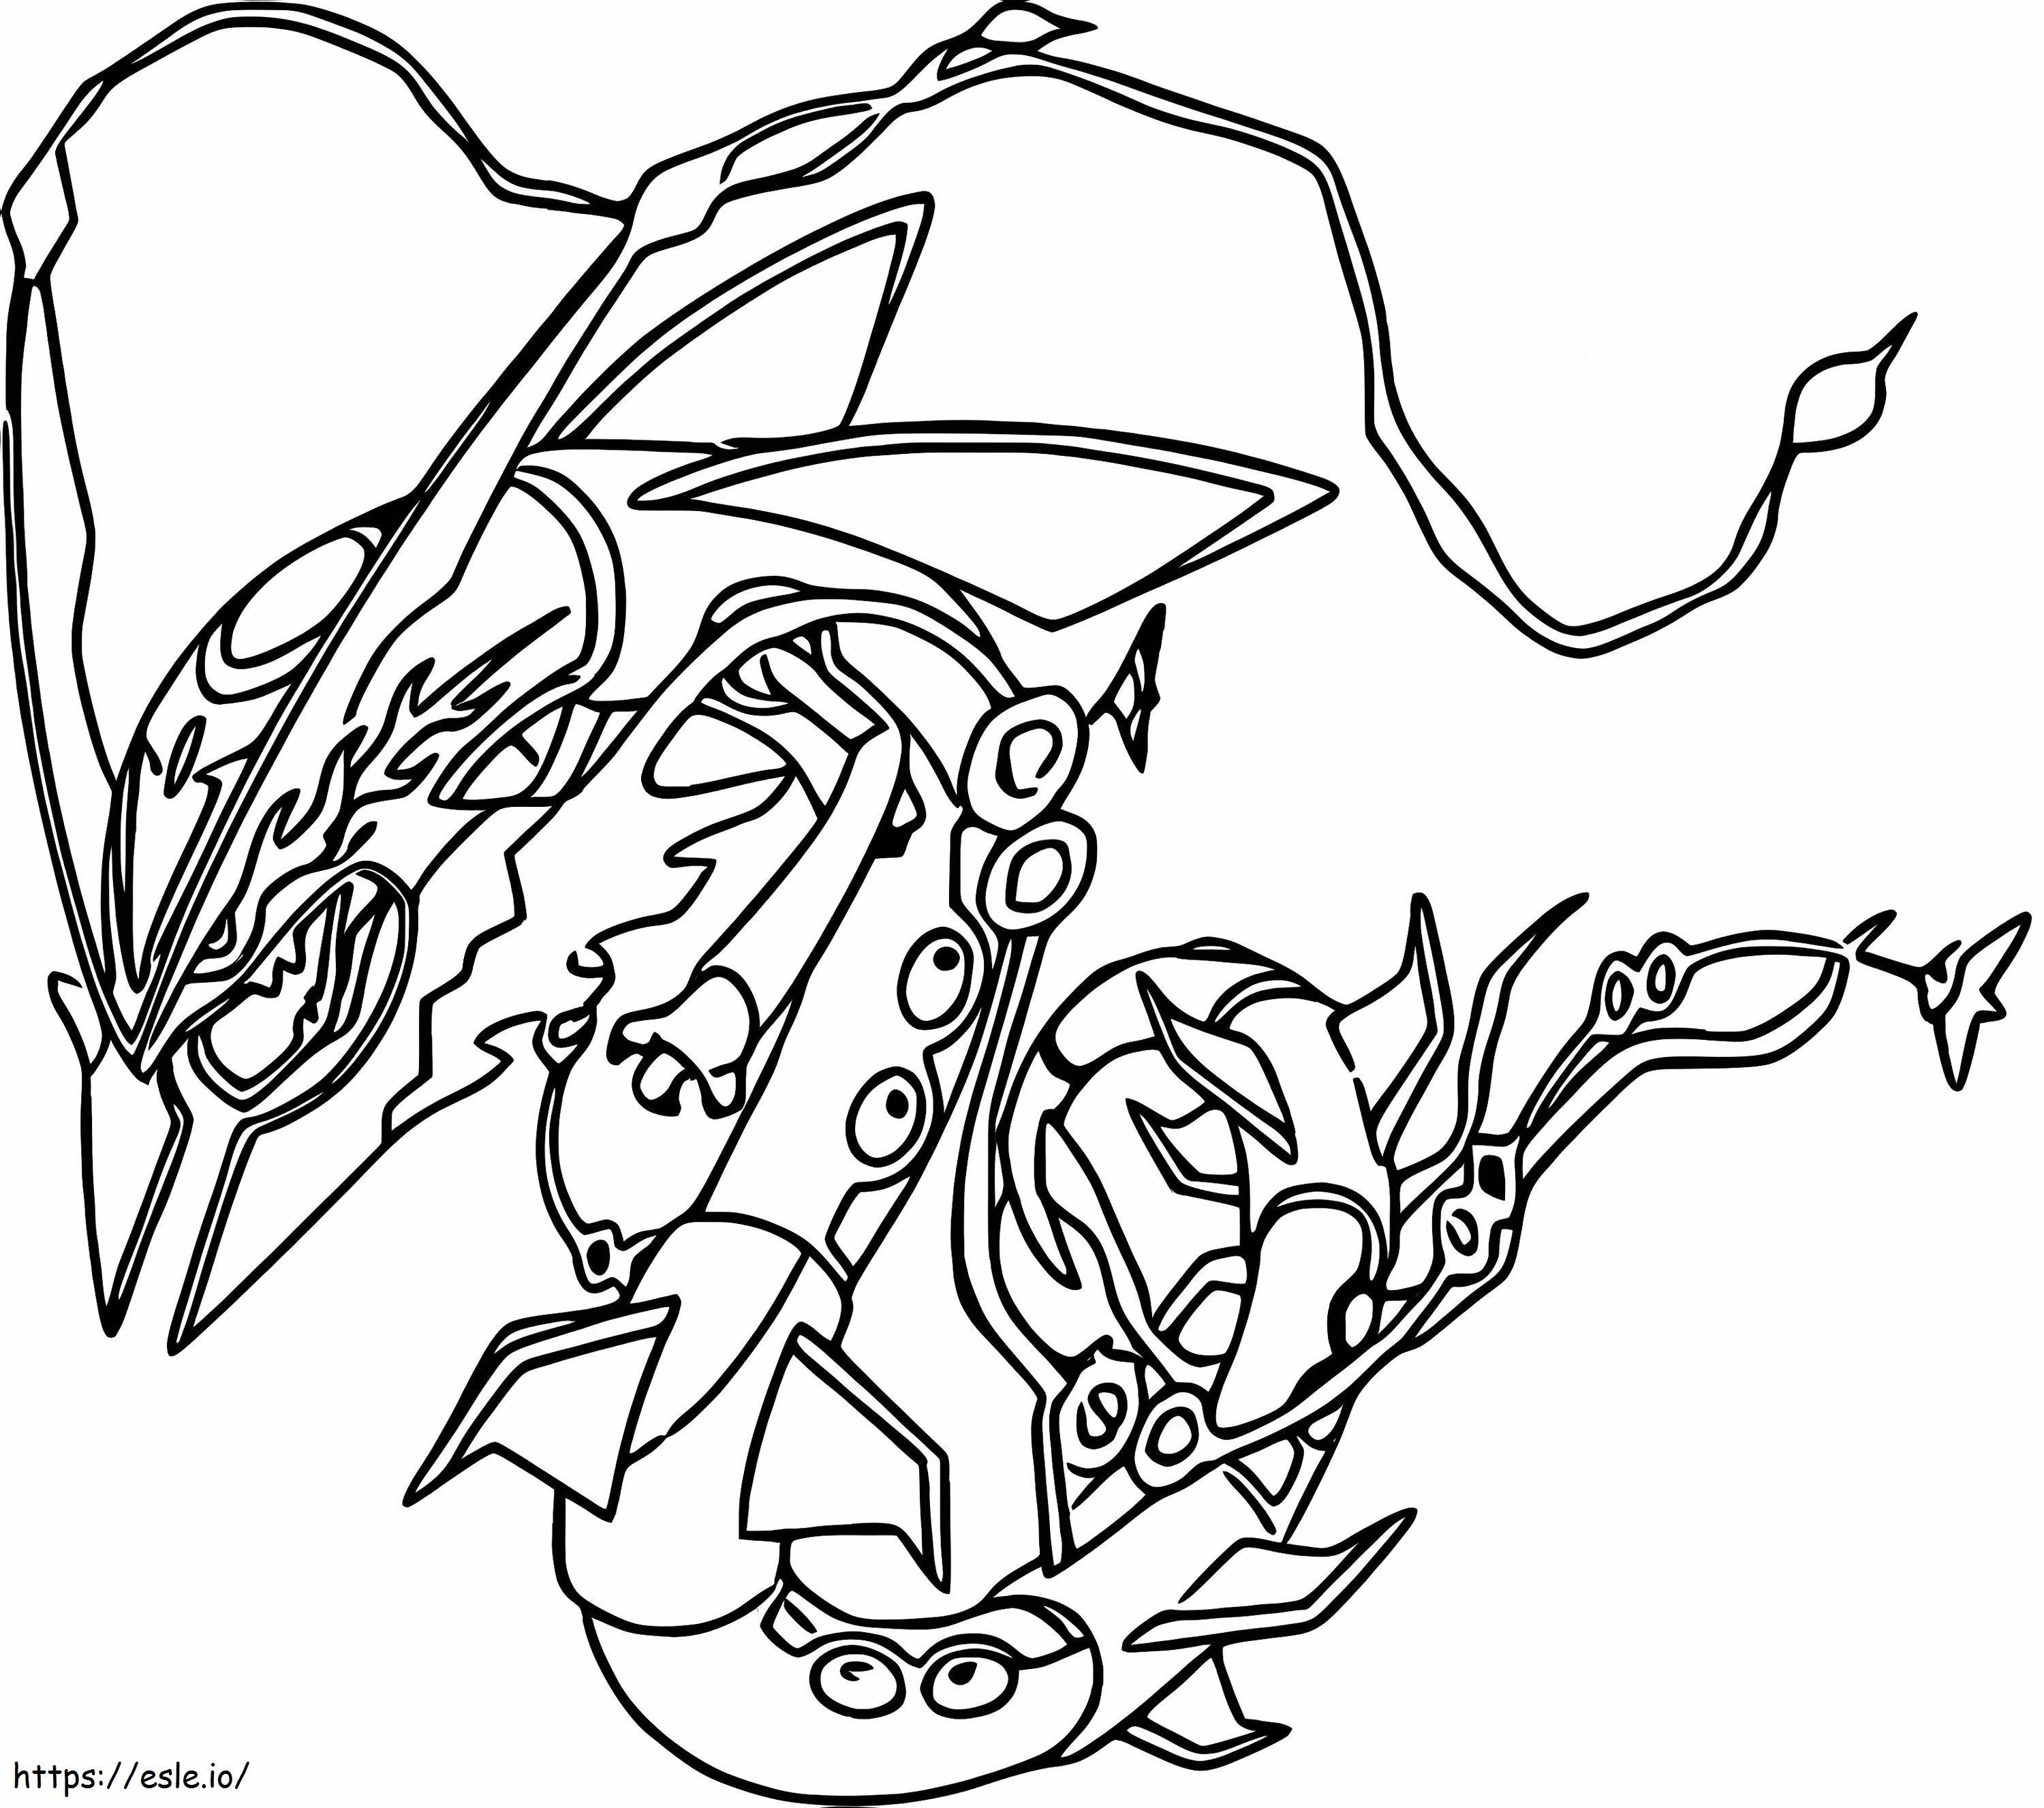 Rayquaza In Legendary Pokemon coloring page